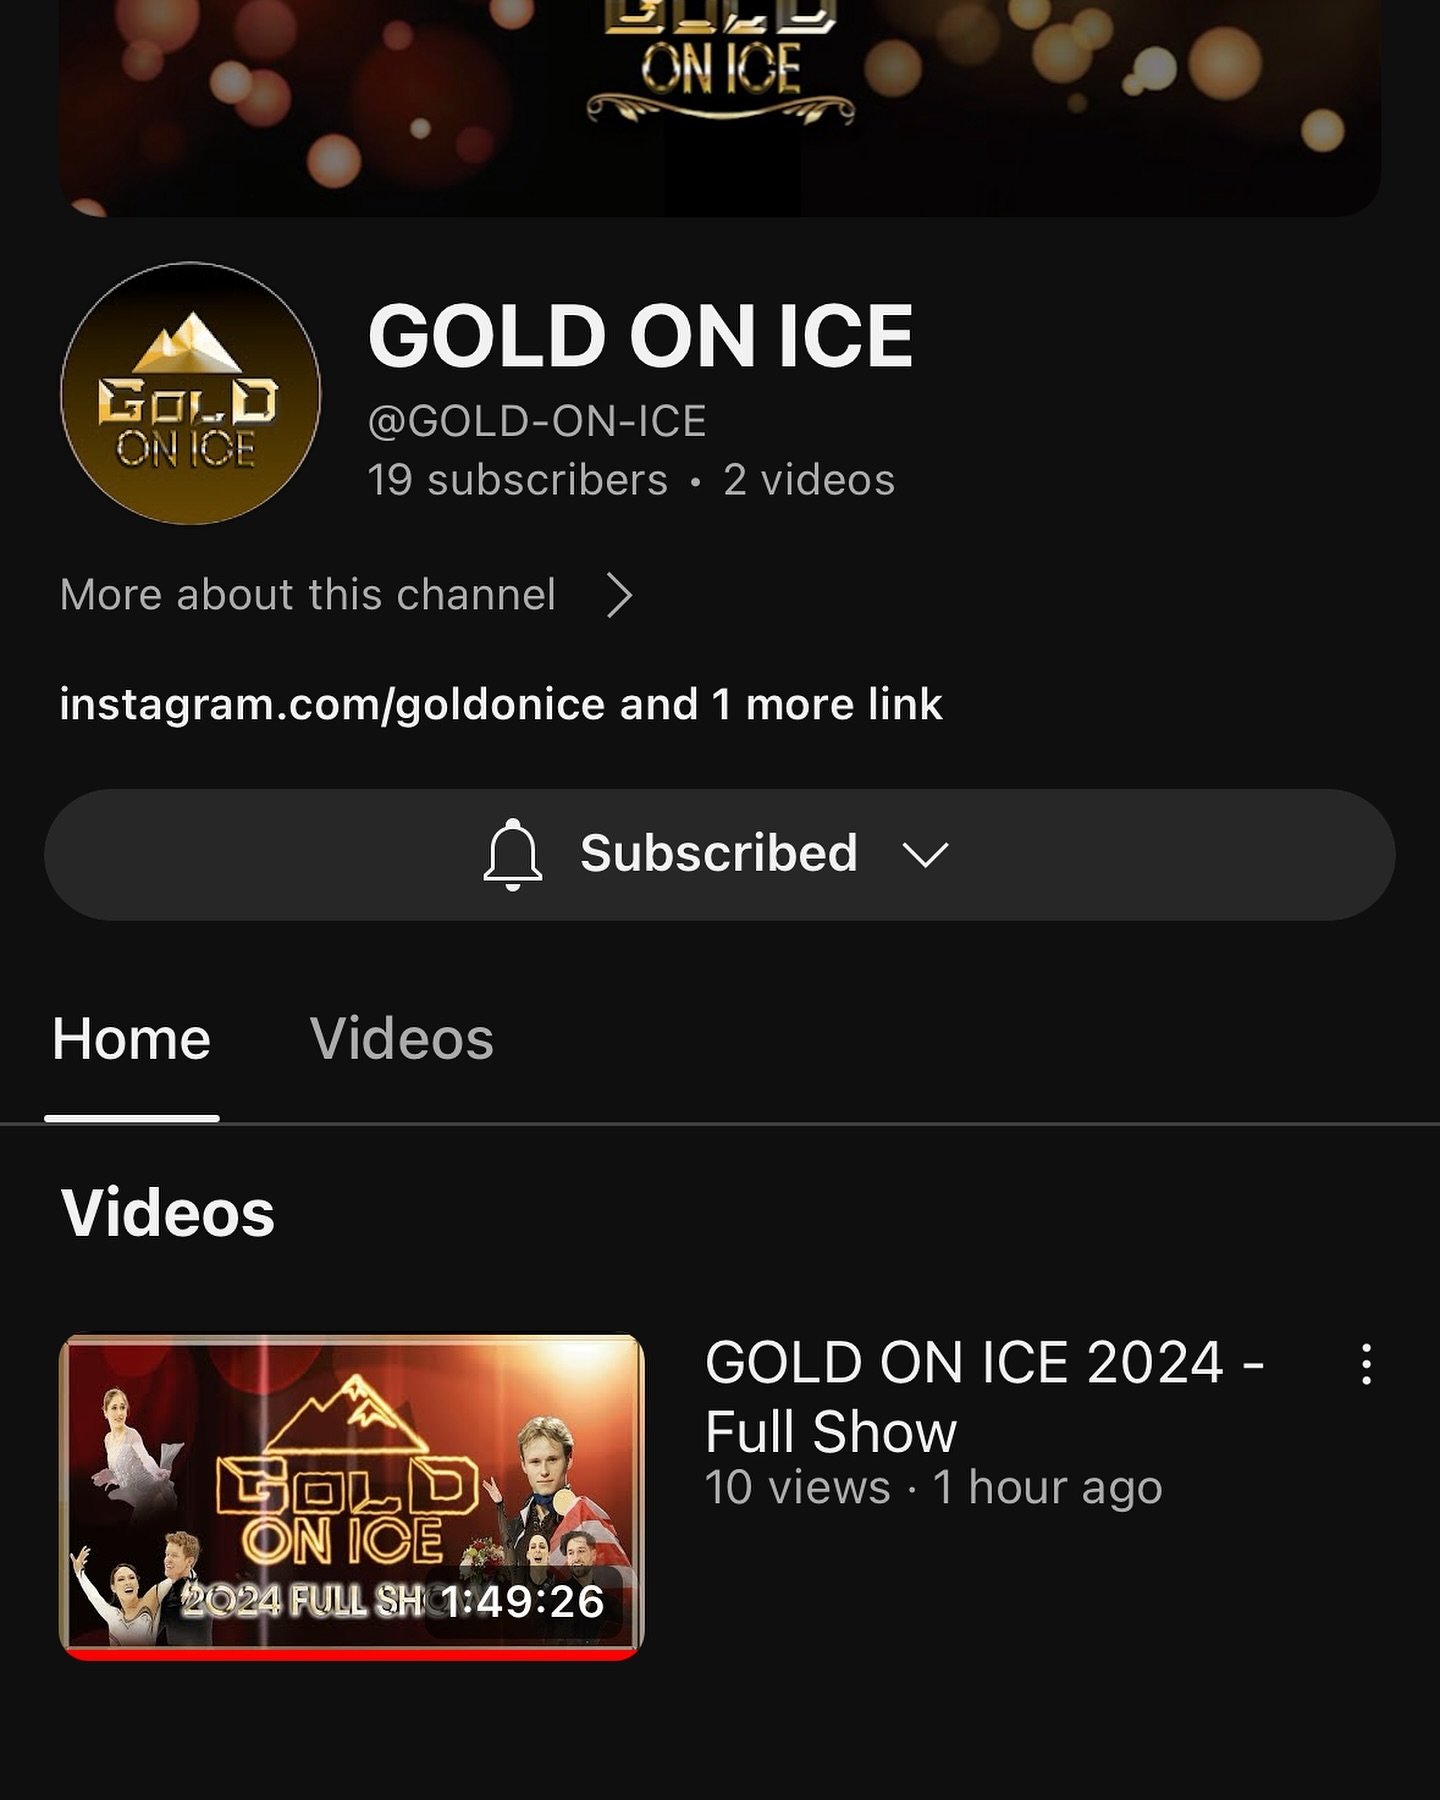 Gold on Ice officially on YOUTUBE https://youtube.com/@GOLD-ON-ICE?si=B2lu3HZEyjWx9QHF